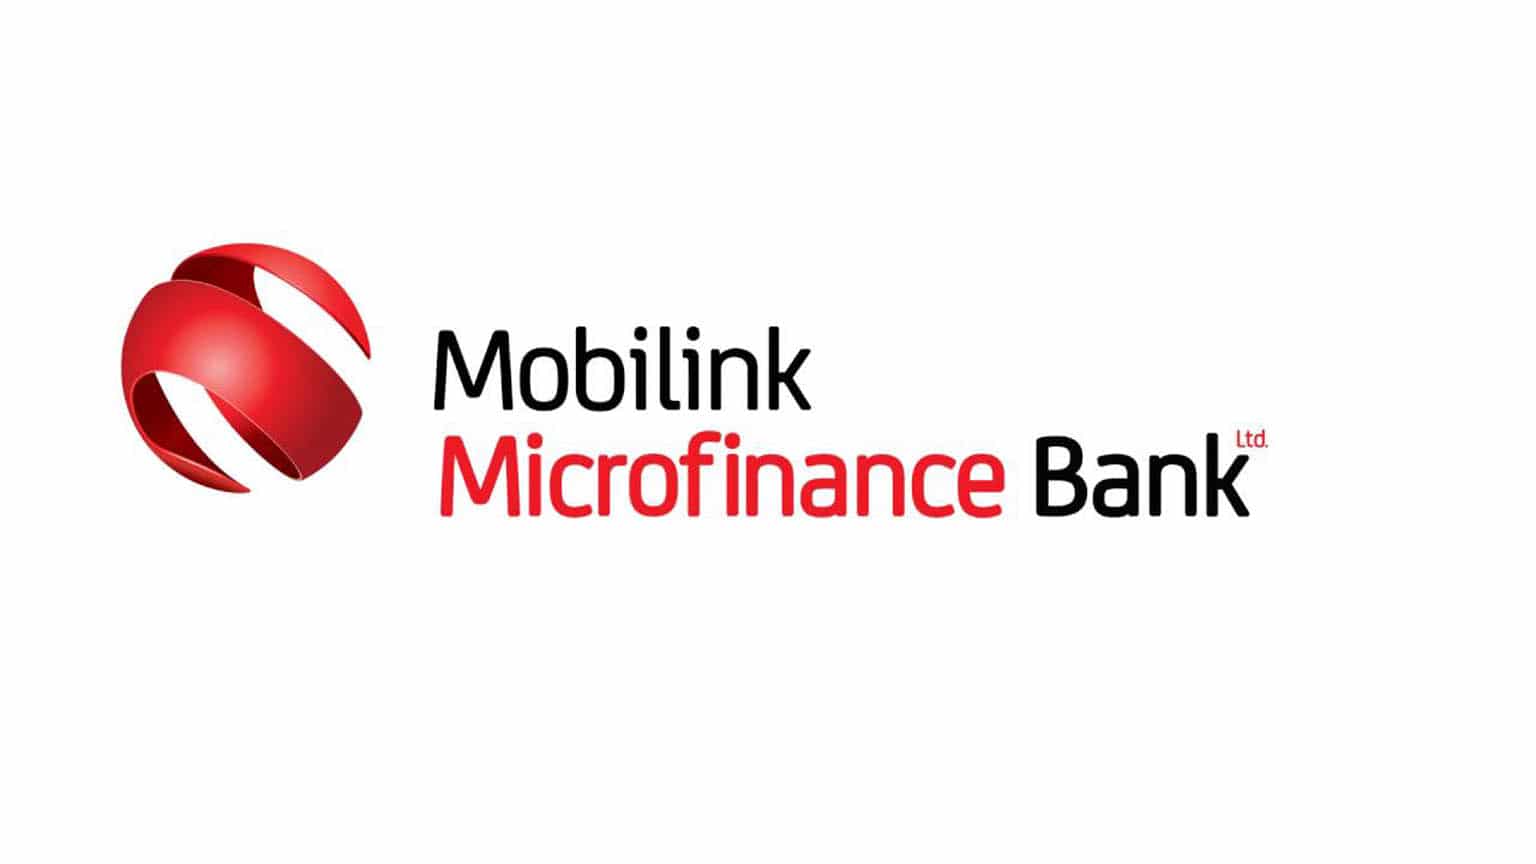 Mobilink Microfinance Bank Limited Takes Digital Banking a step ahead with Online Account Opening Solutions